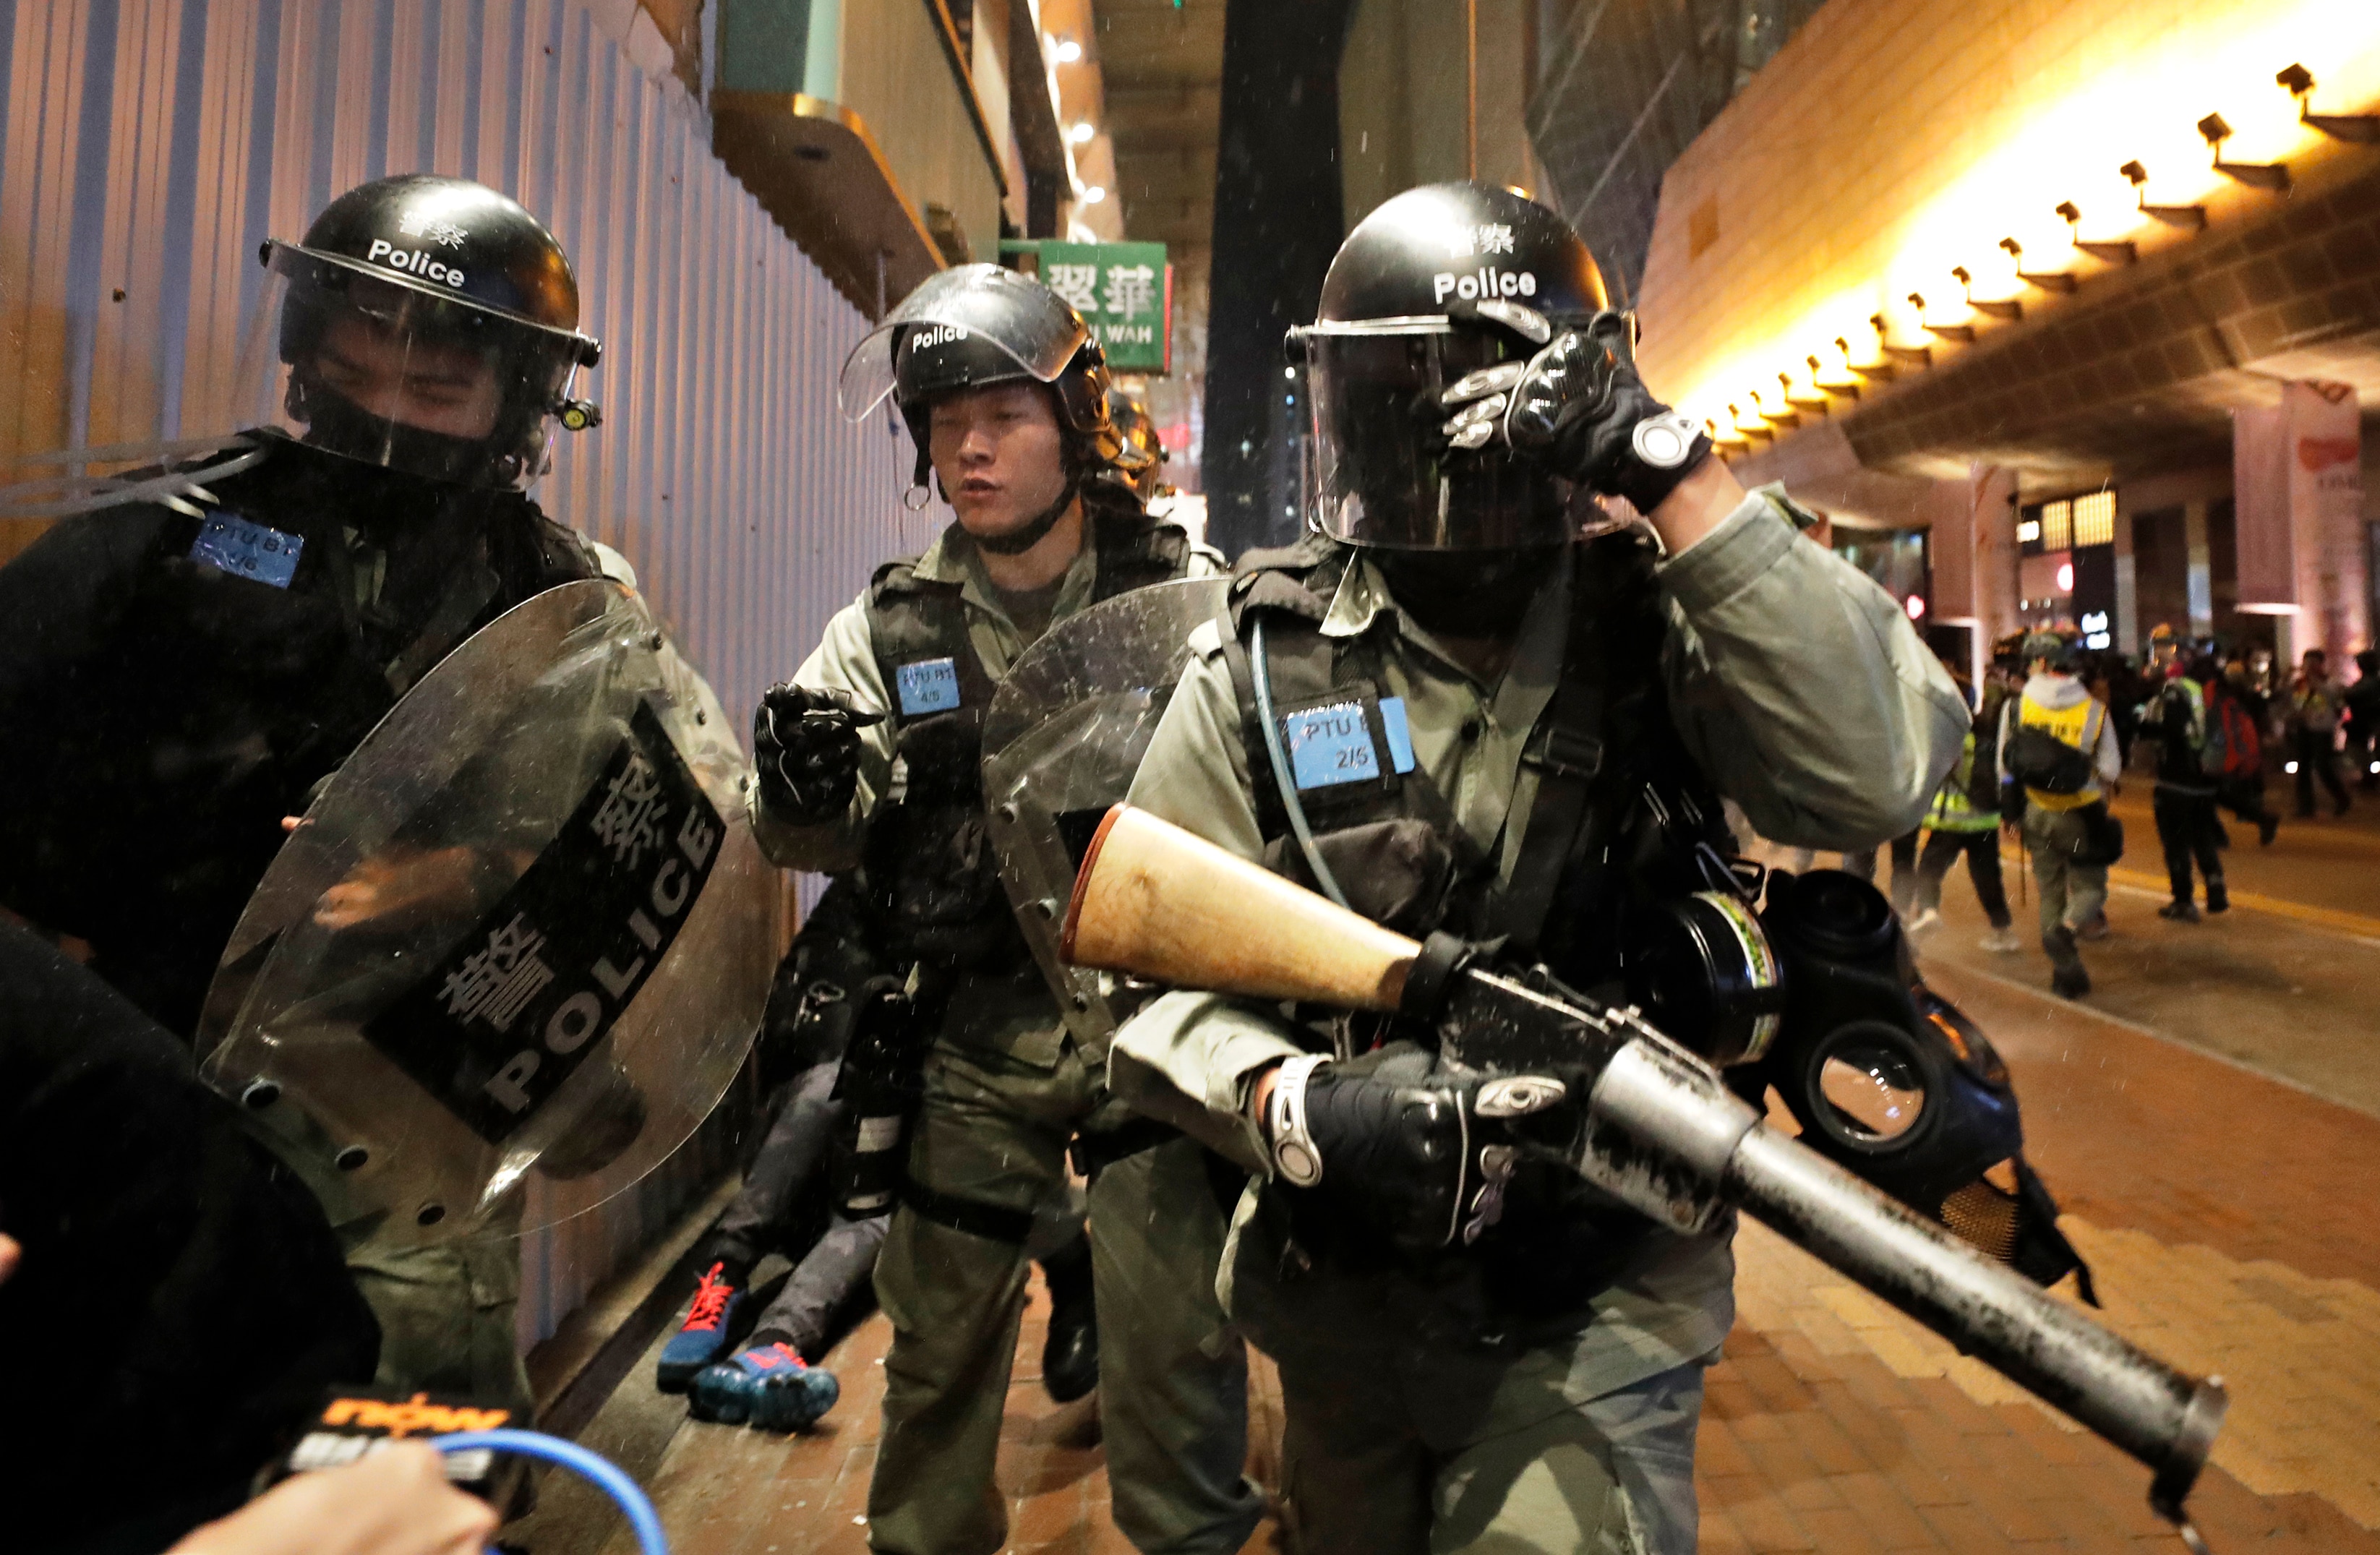 Riot police walk to detain protesters during a demonstration in Hong Kong.